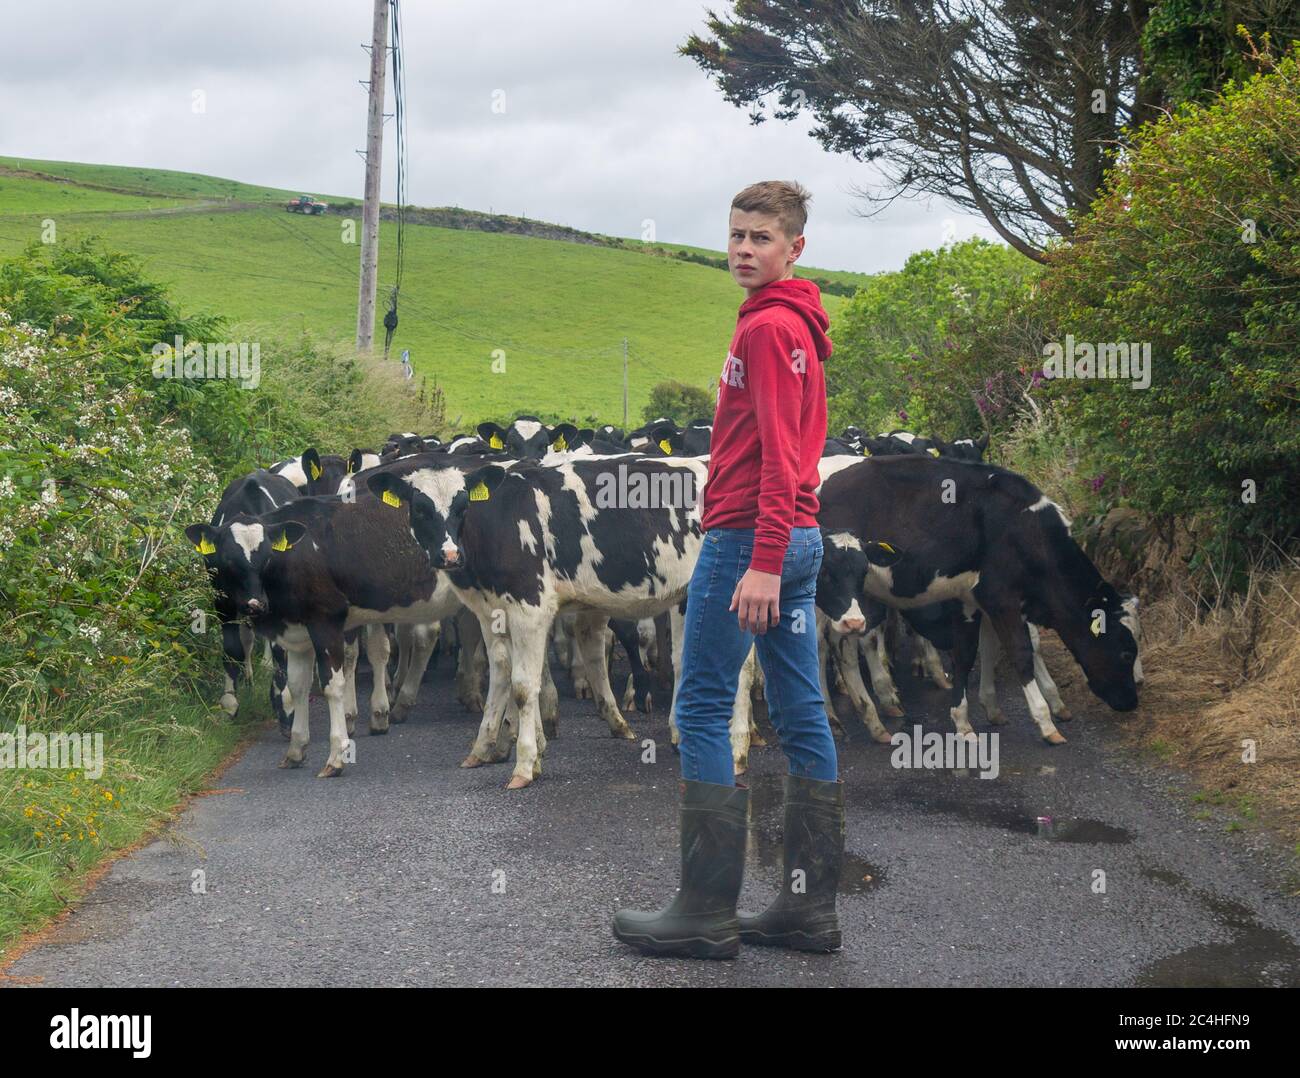 Young Man or boy herding cattle on a road Stock Photo